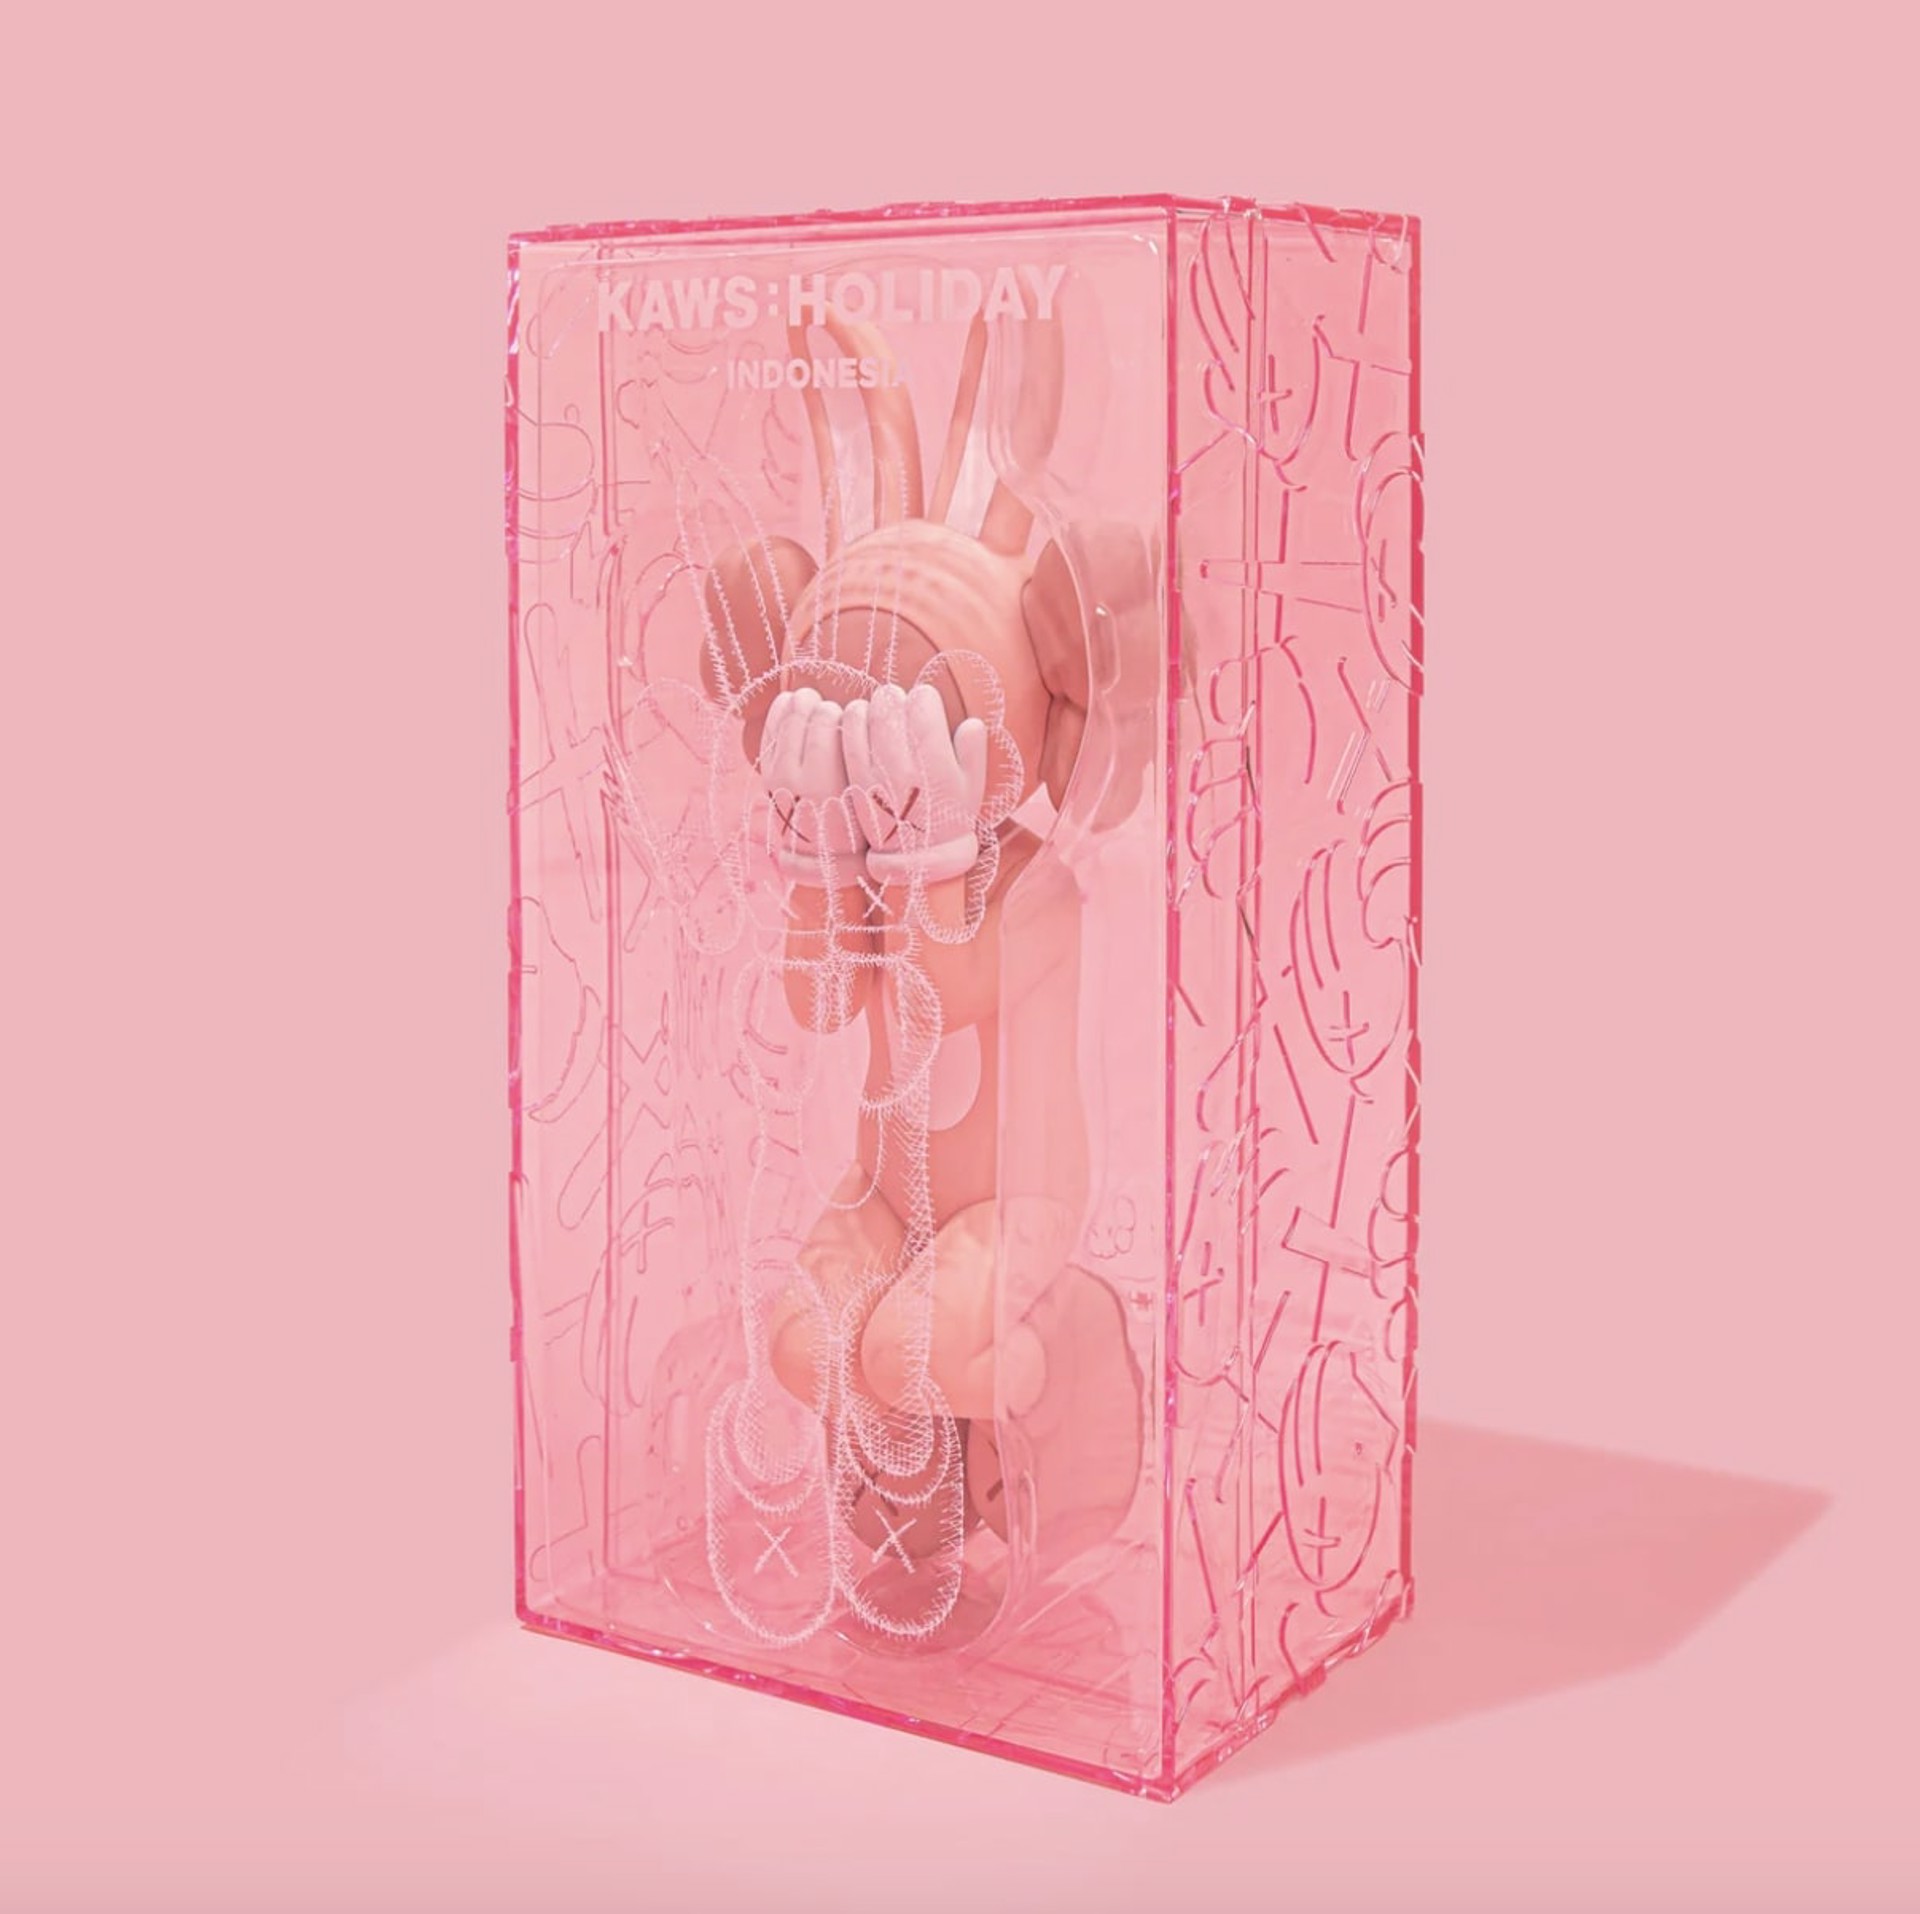 HOLIDAY INDONESIA - ACCOMPLICE Figure (Pink) by Kaws